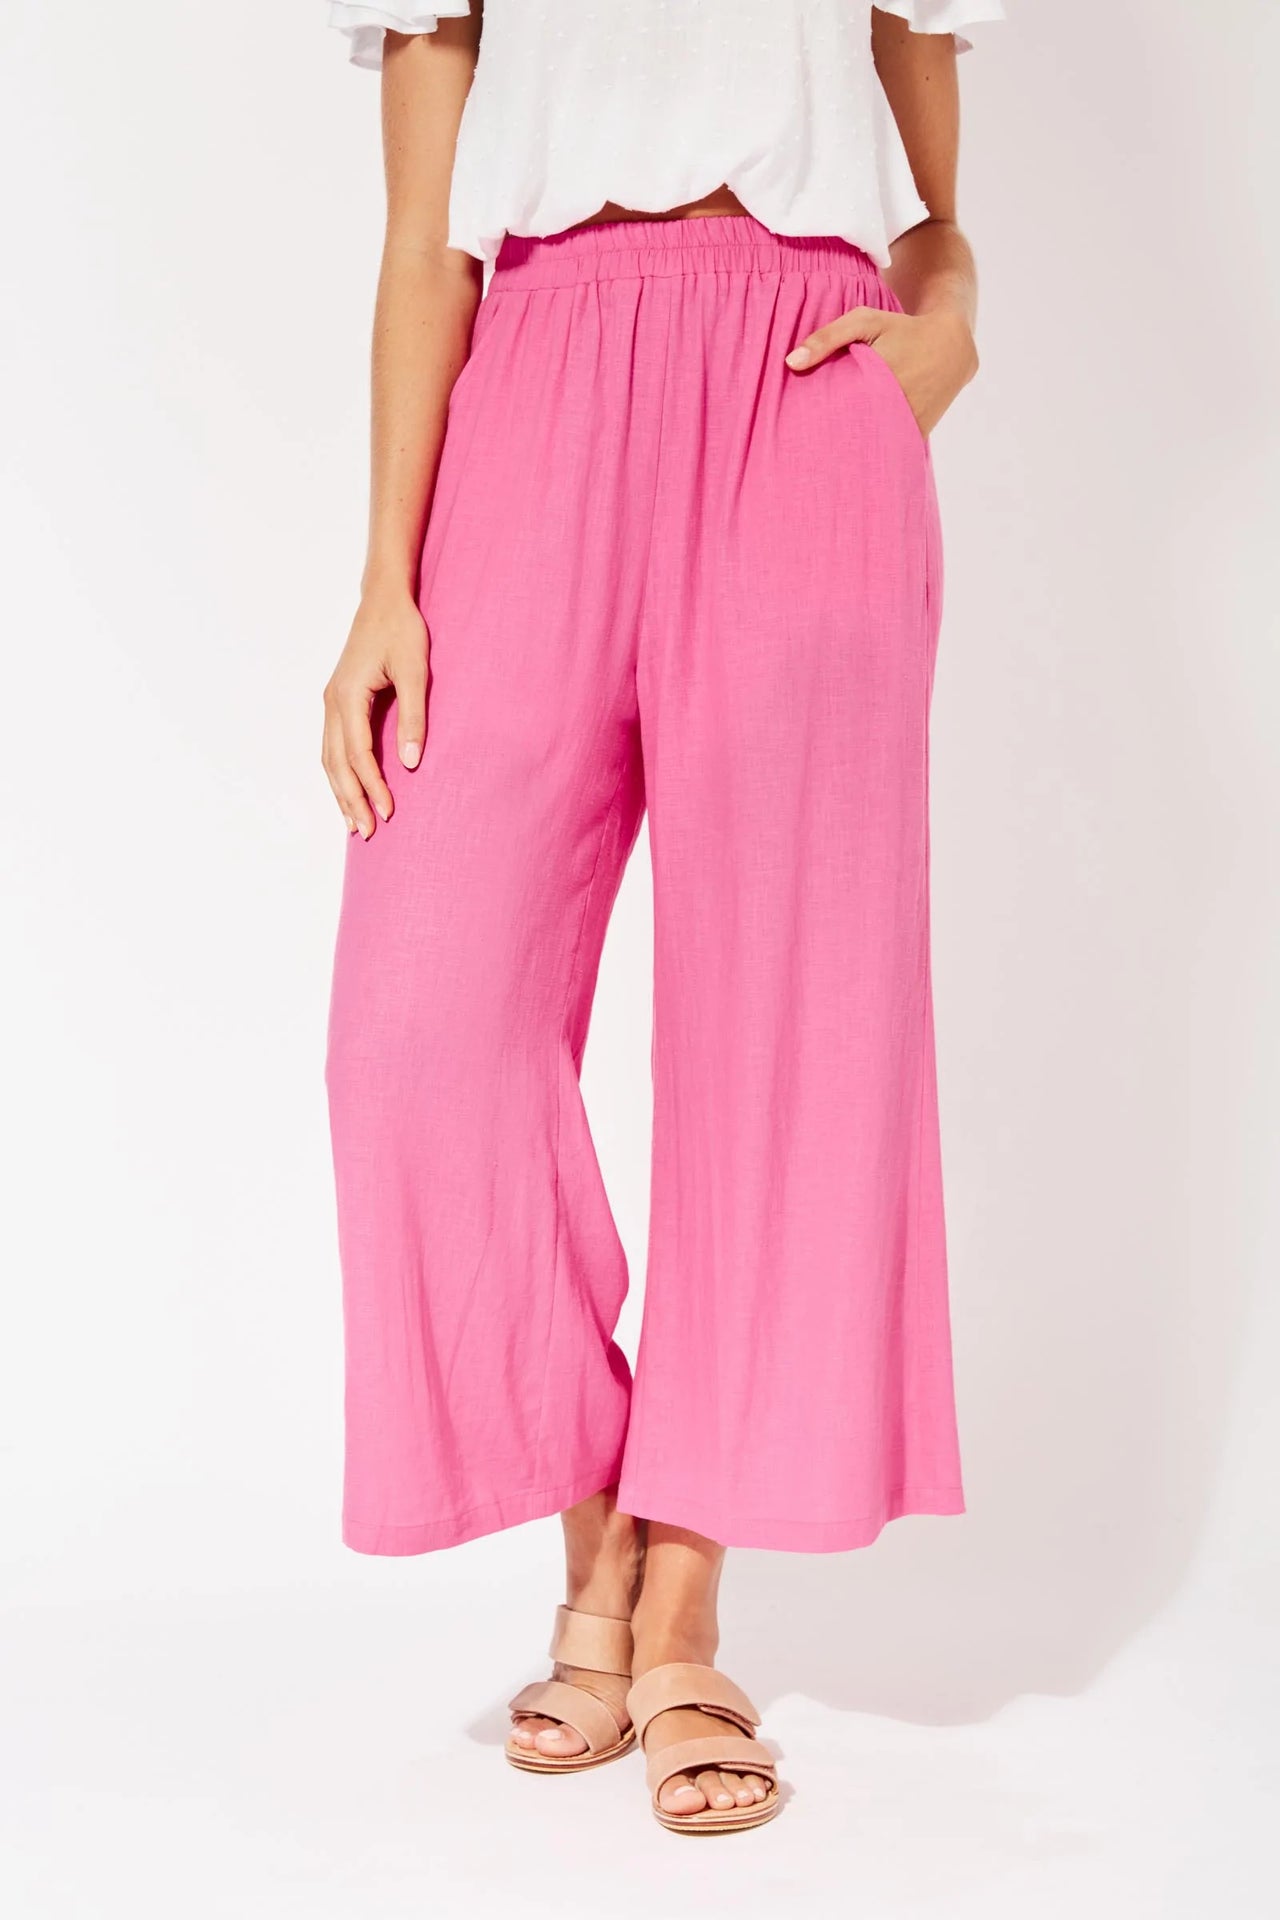 Haven St Barts Flamingo Cropped Trousers